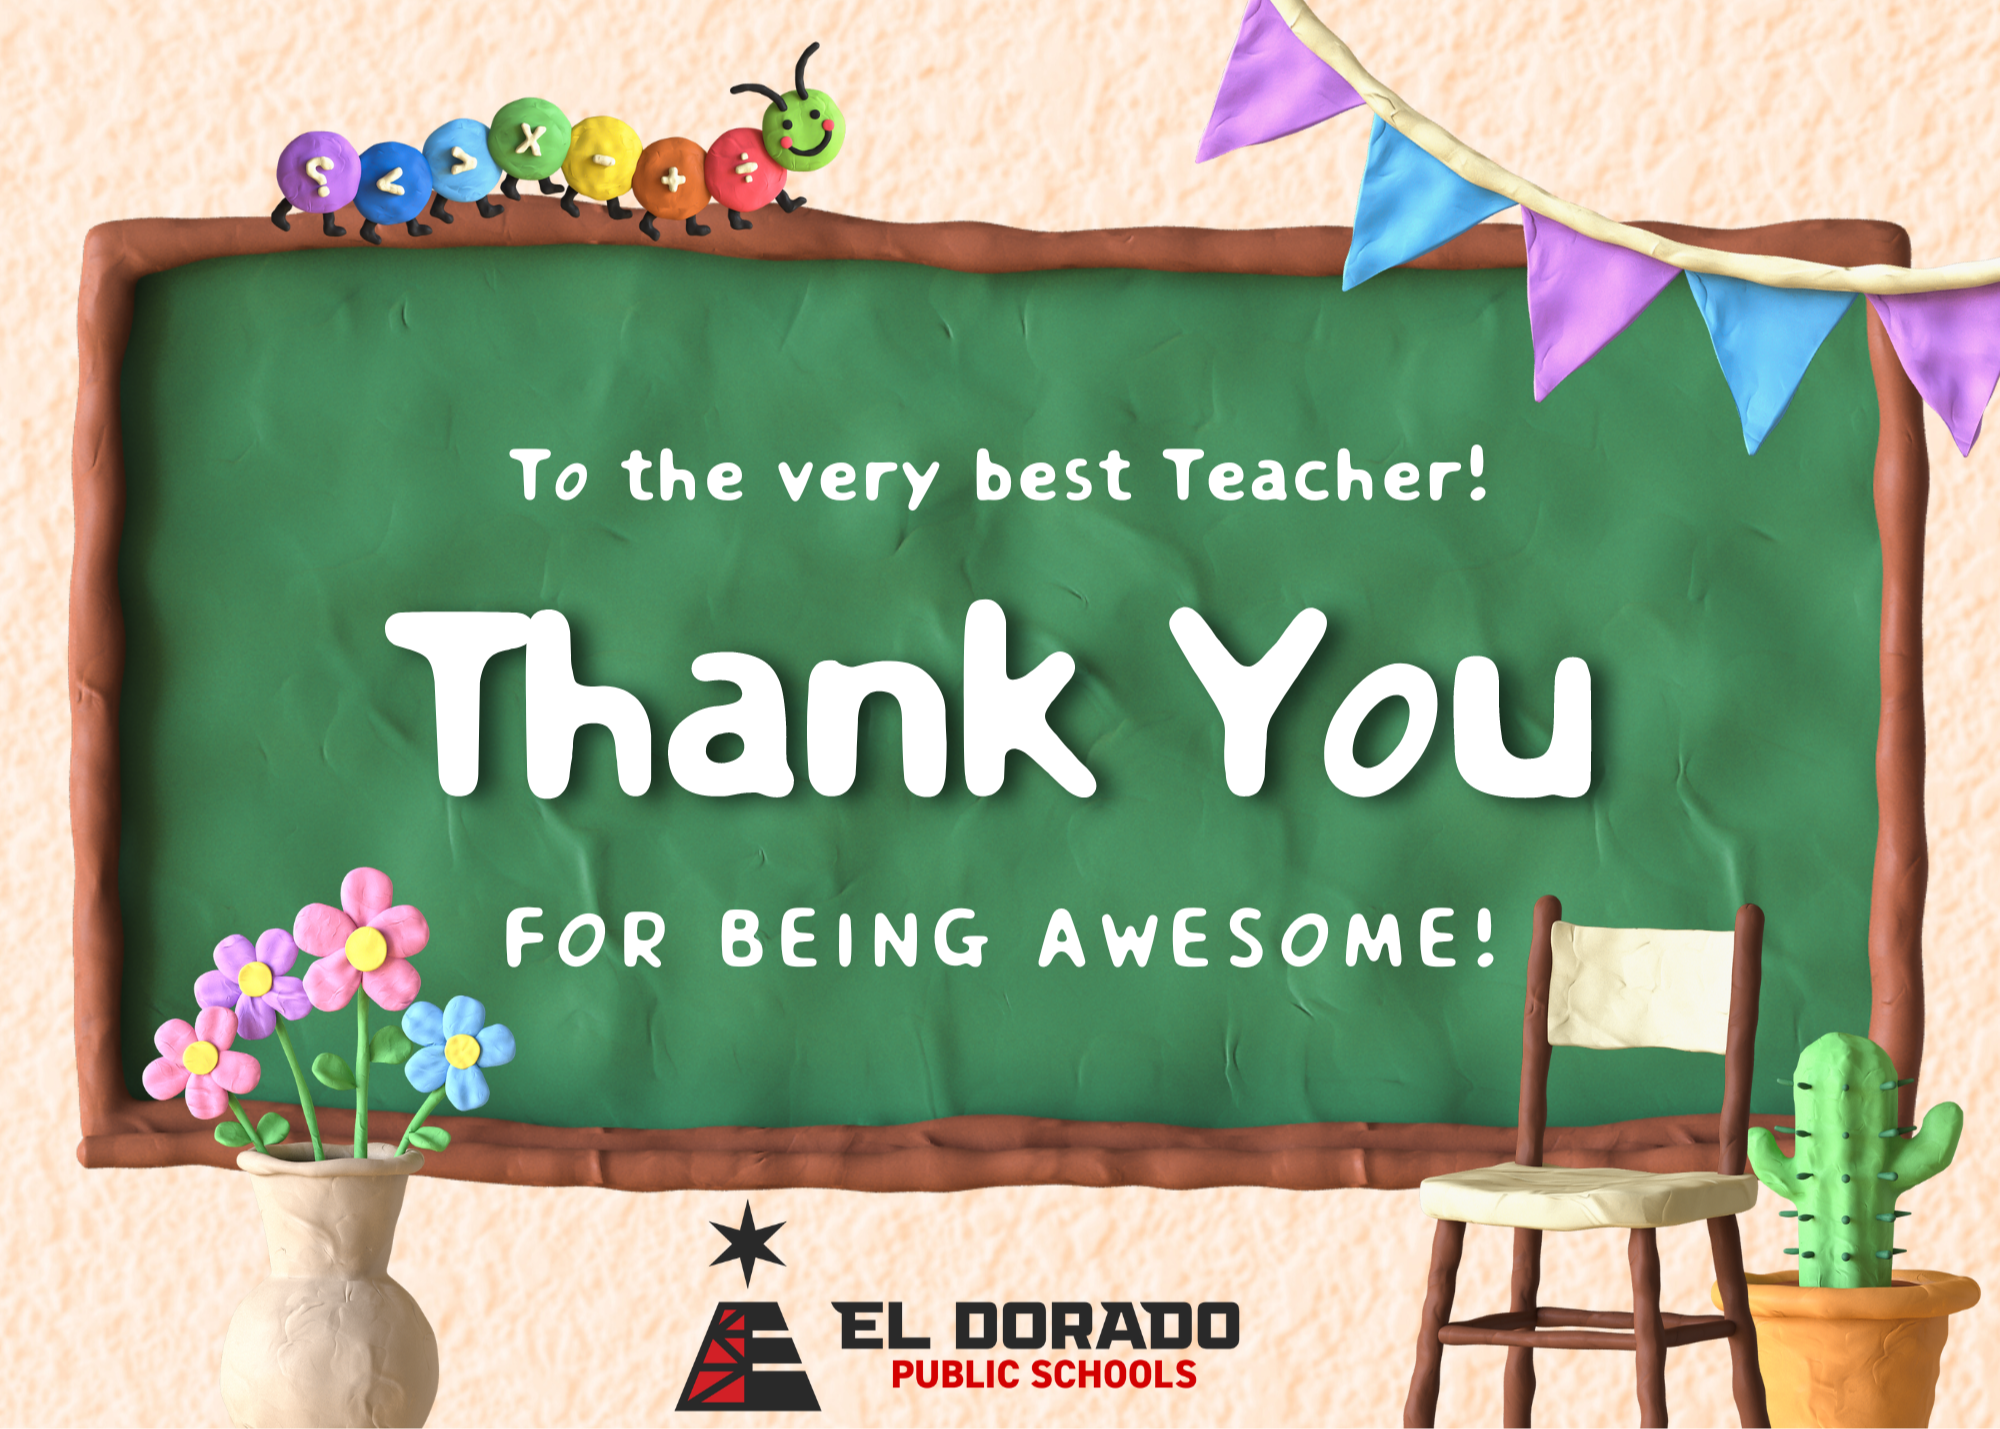 To the very best teacher: Thank You for being awesome!